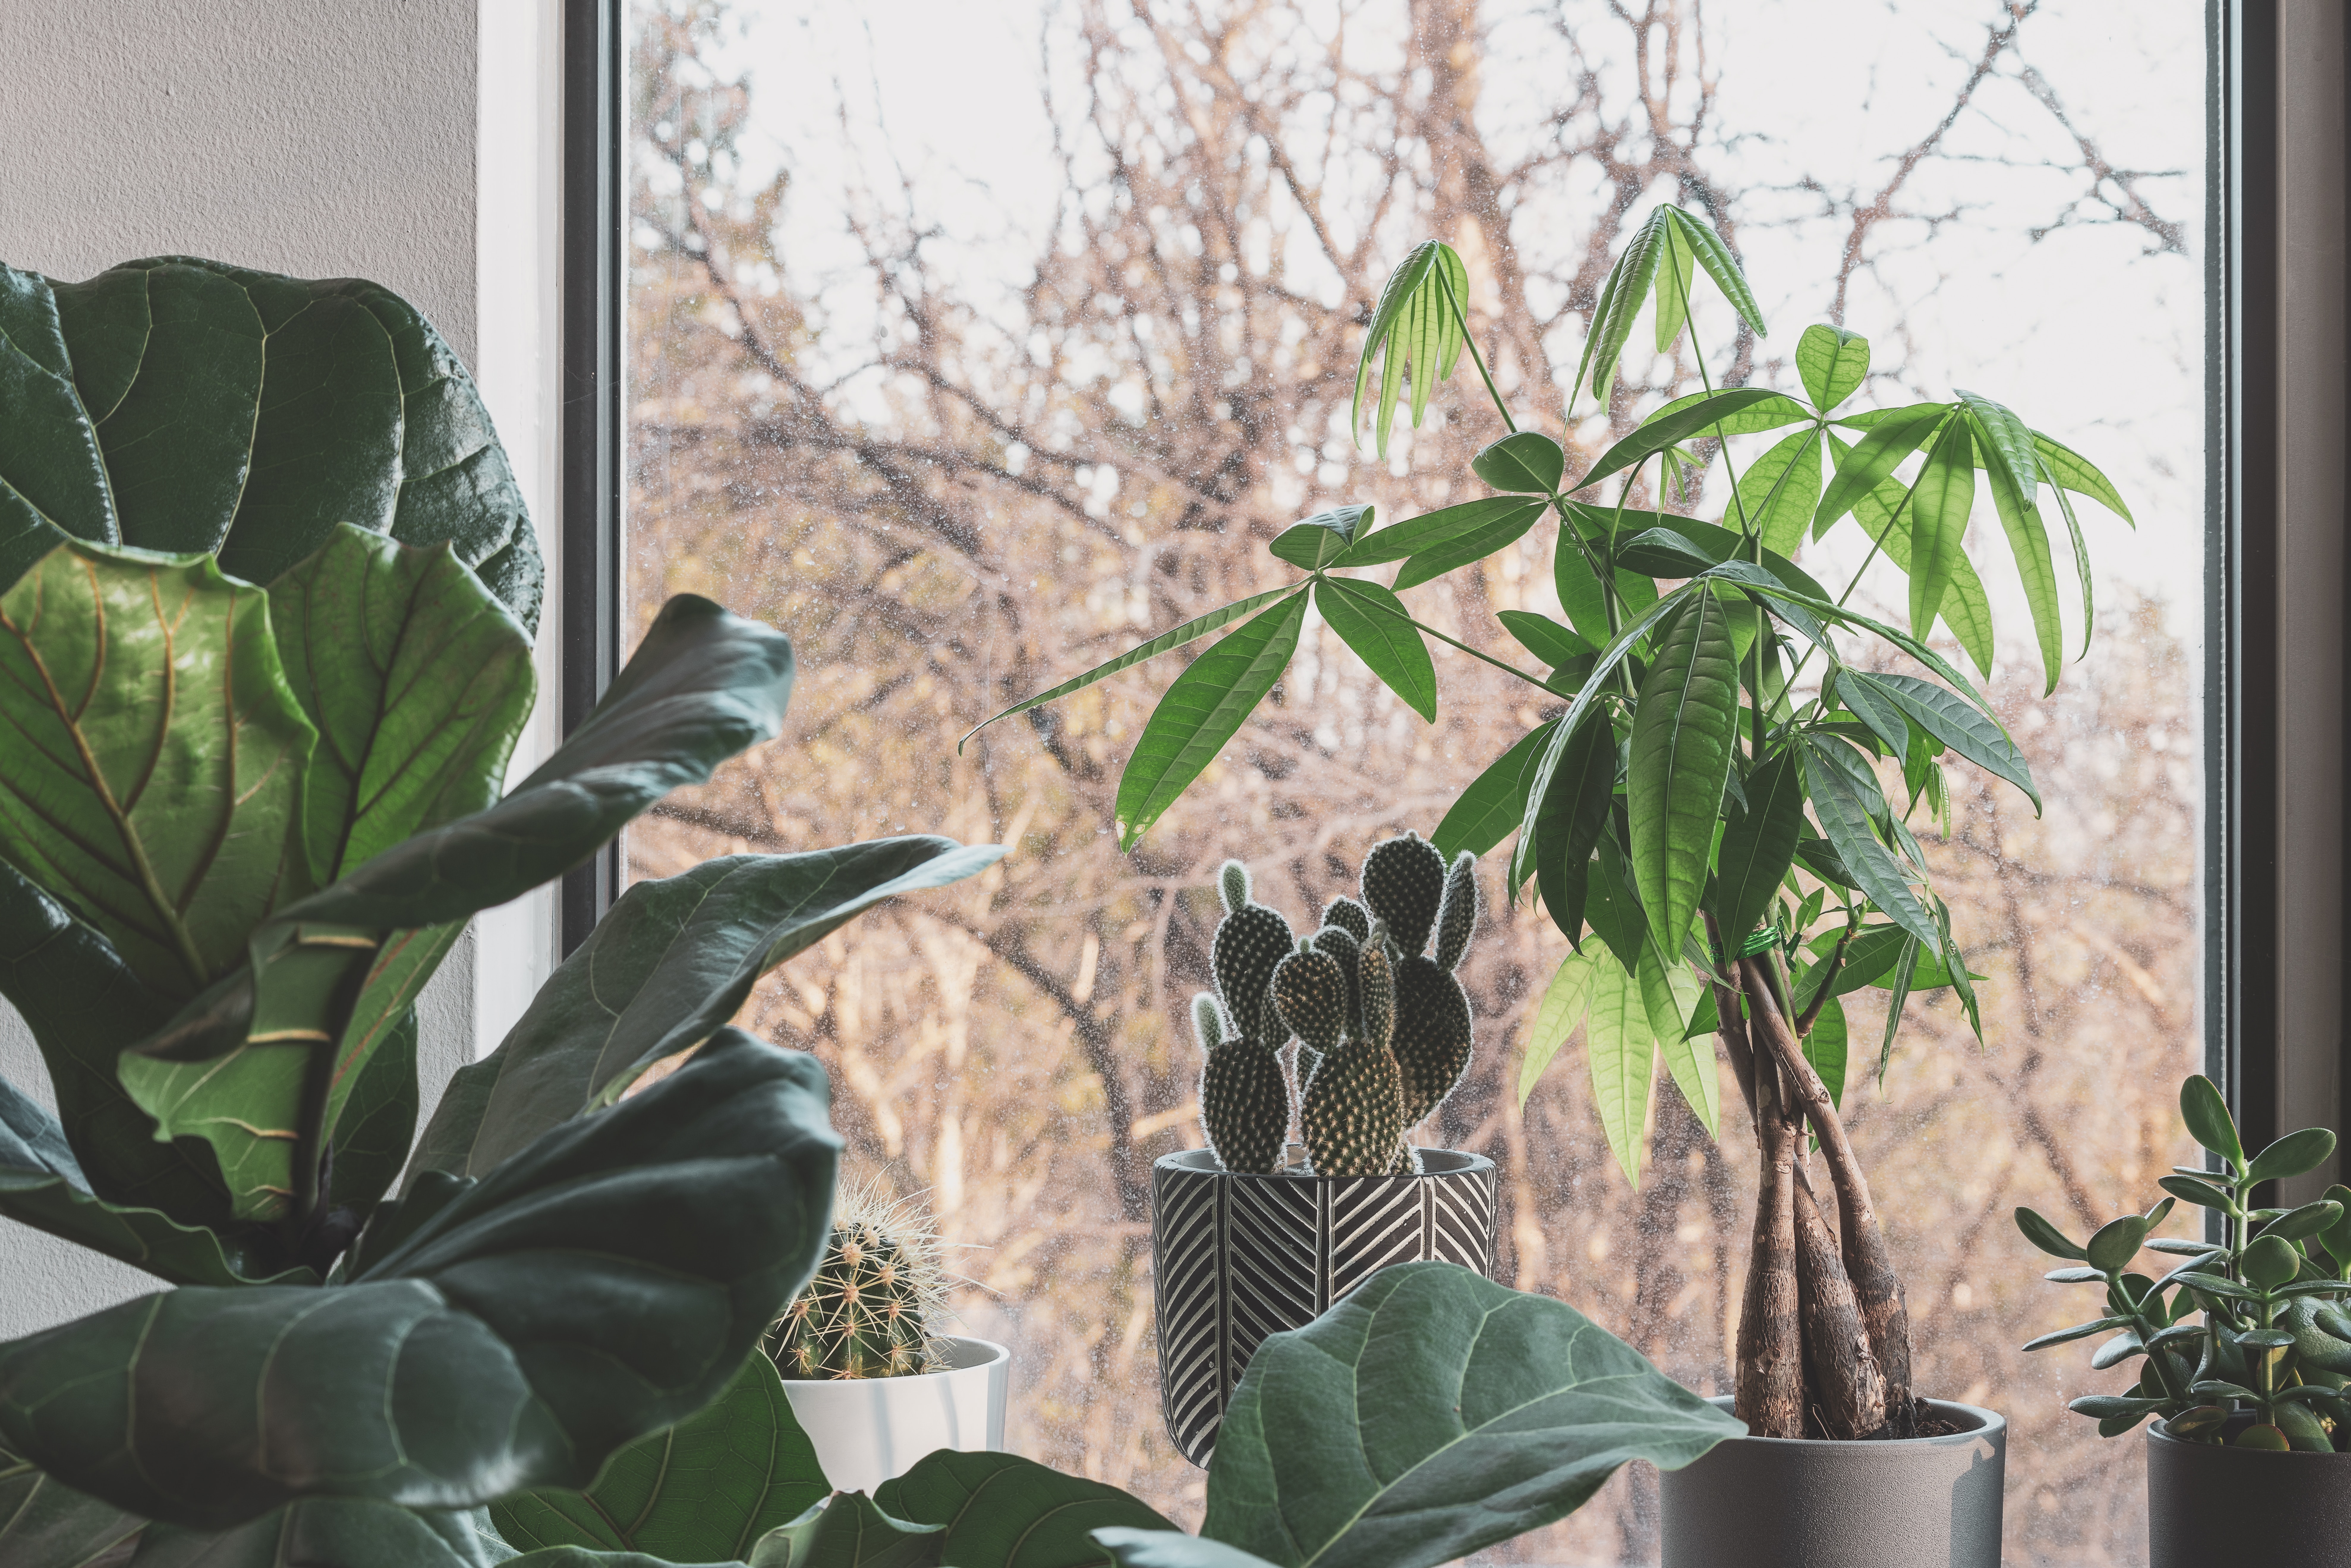 The money tree, also known as the Pachira Aquatica is said to bring positivity and is a great indoor tree that thrives in low light settings. Pictured: A money tree.